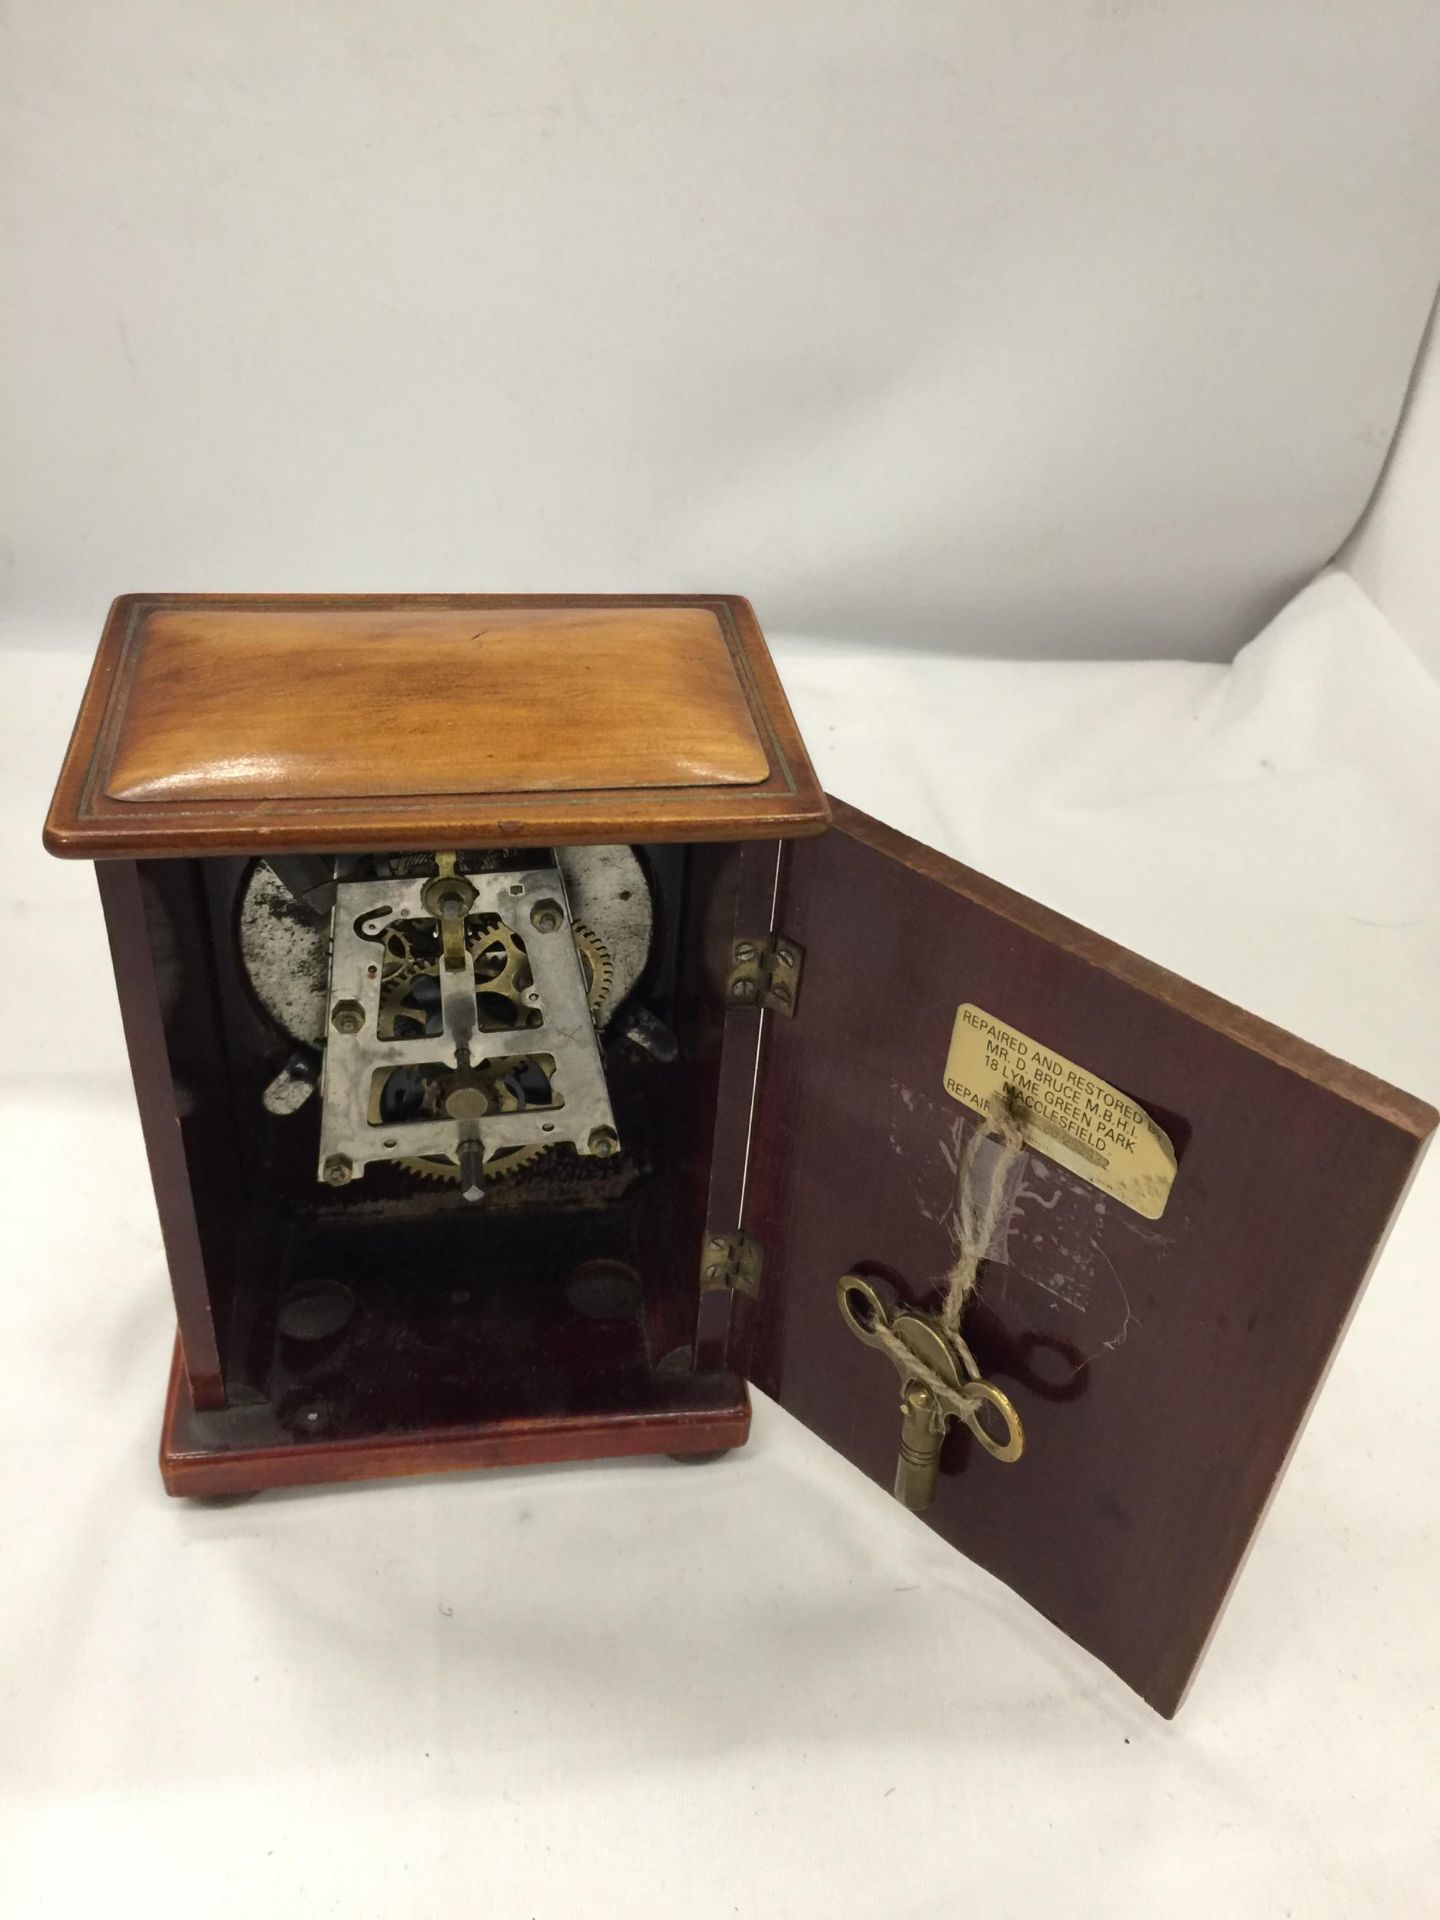 A VINTAGE FRUITWOOD MANTLE CLOCK WITH KEY - Image 3 of 5